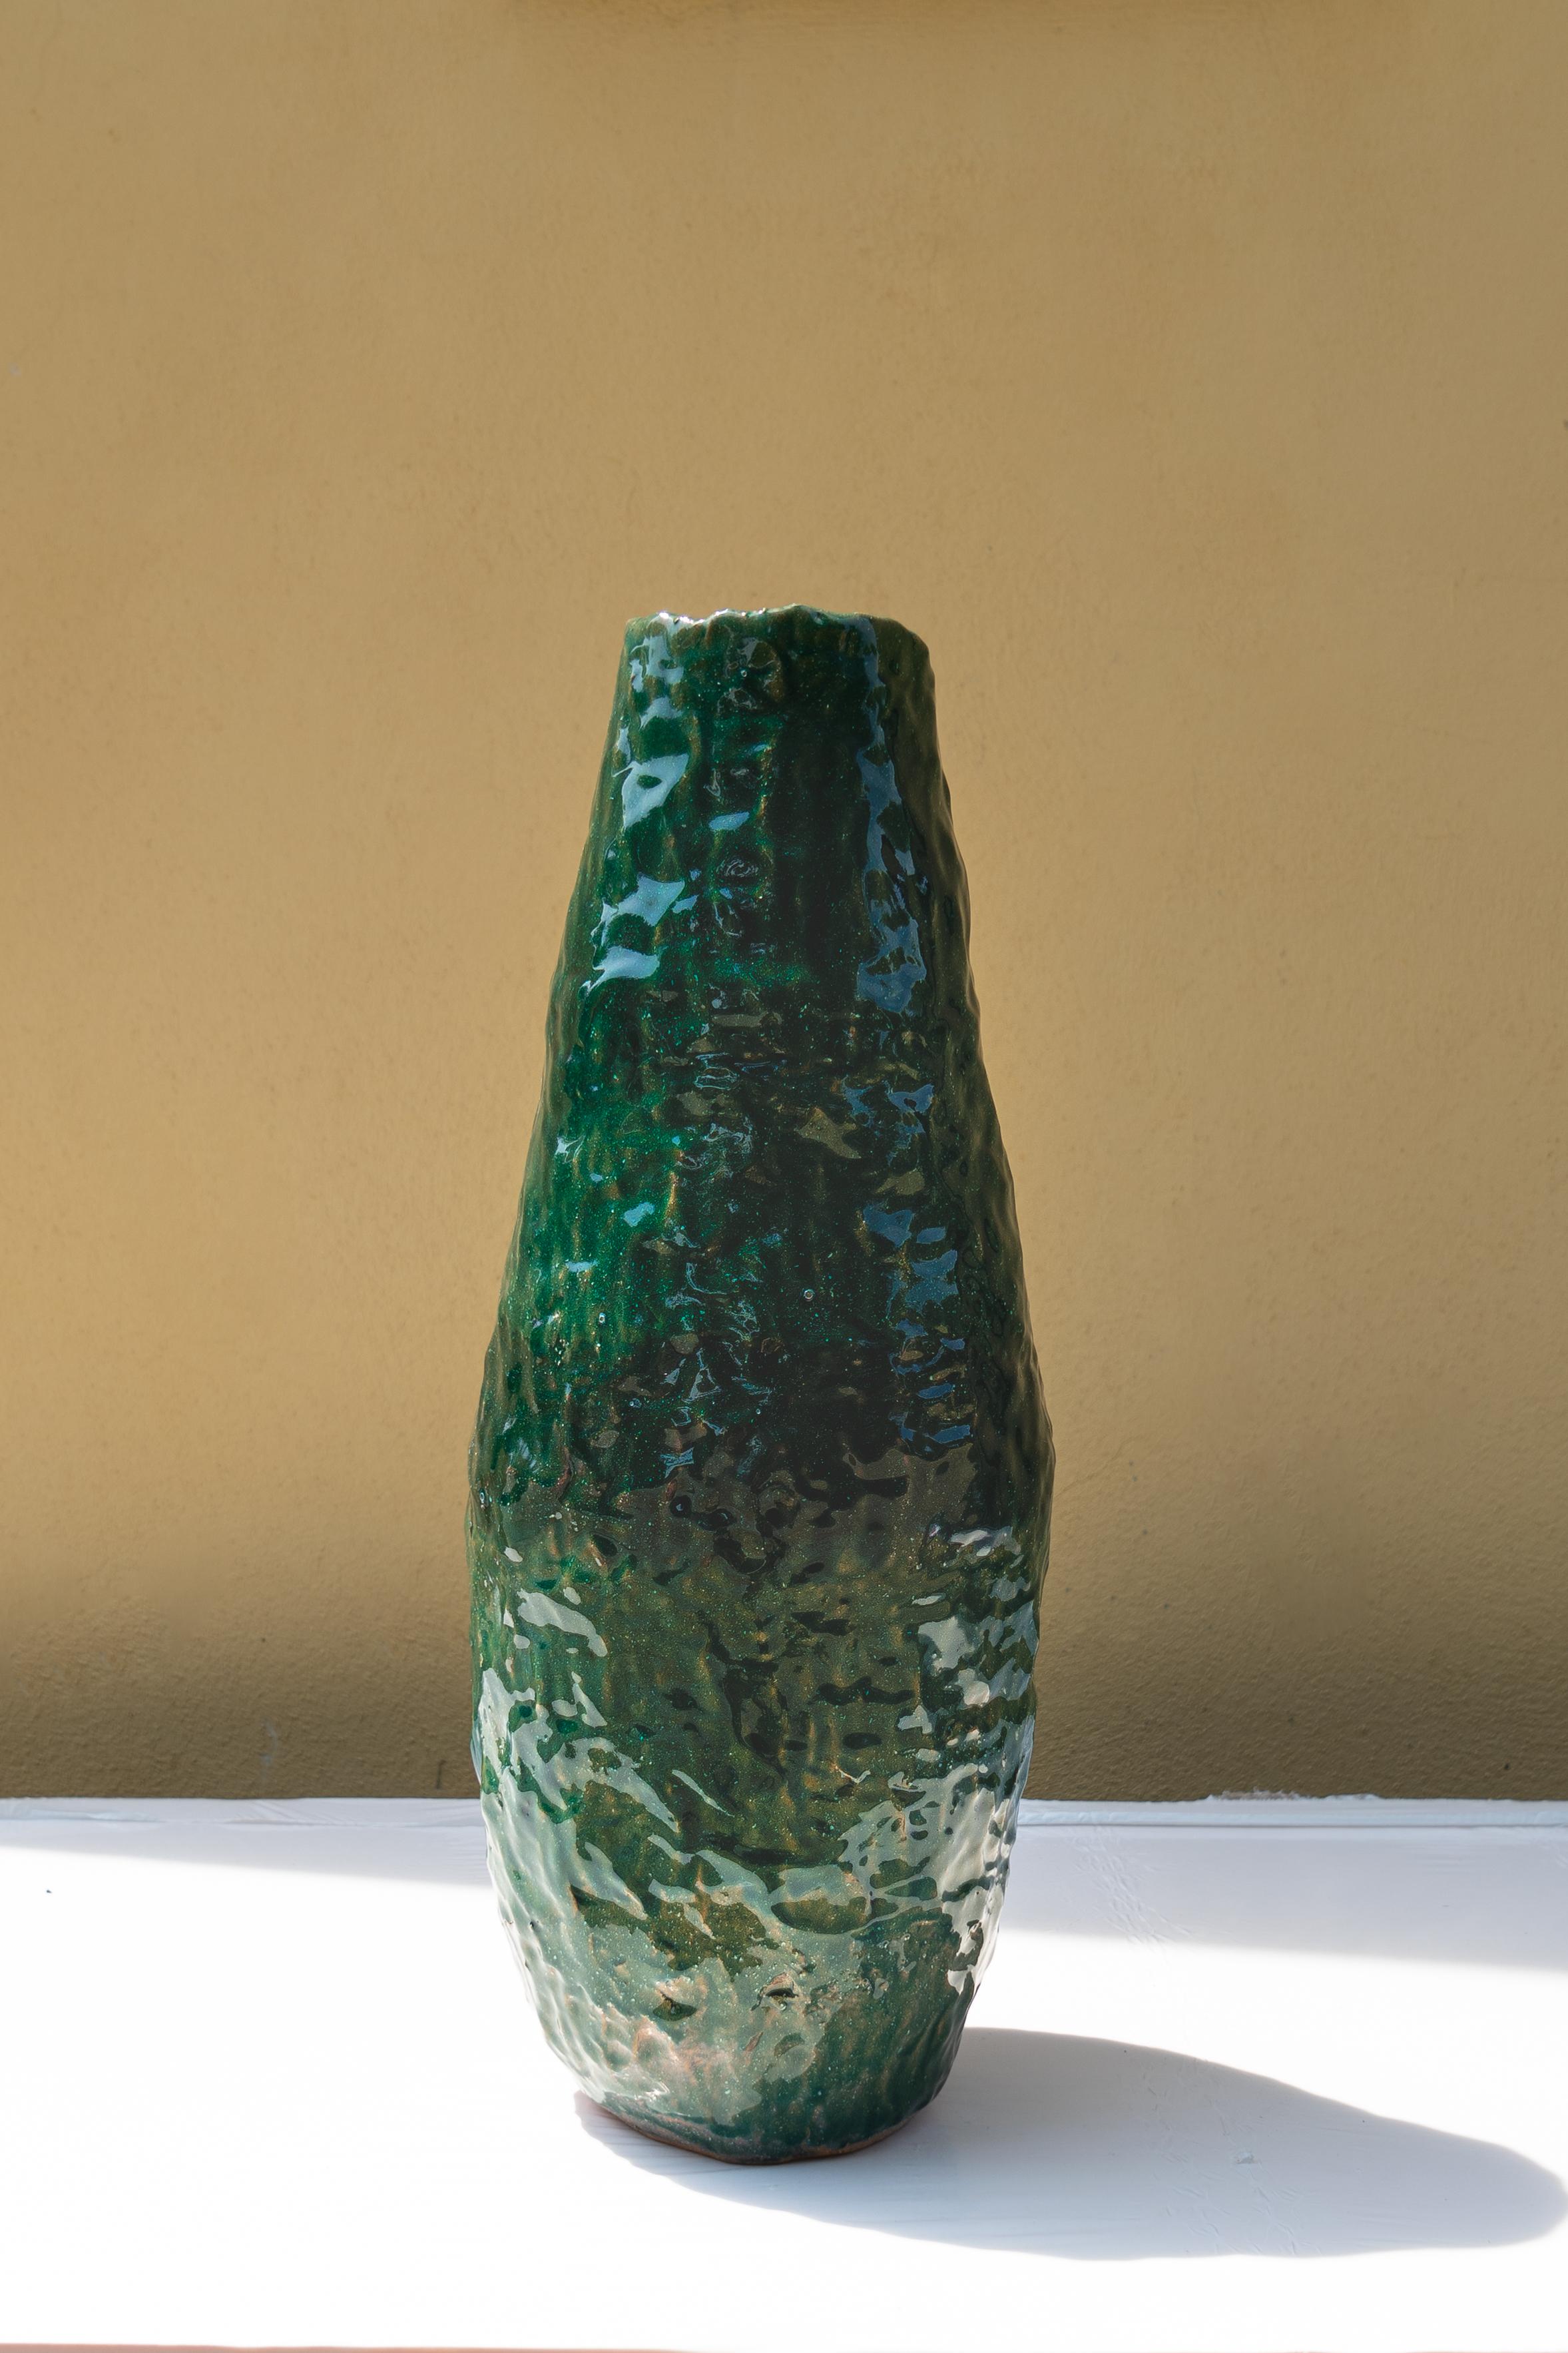 Green vase by Daniele Giannetti
Dimensions: Ø 22 x H 52 cm.
Materials: glazed terracotta. 

All pieces are made in terracotta from Montelupo, only fired once, then colored by Daniele Giannetti with a white acrylic base, and then a mixture of